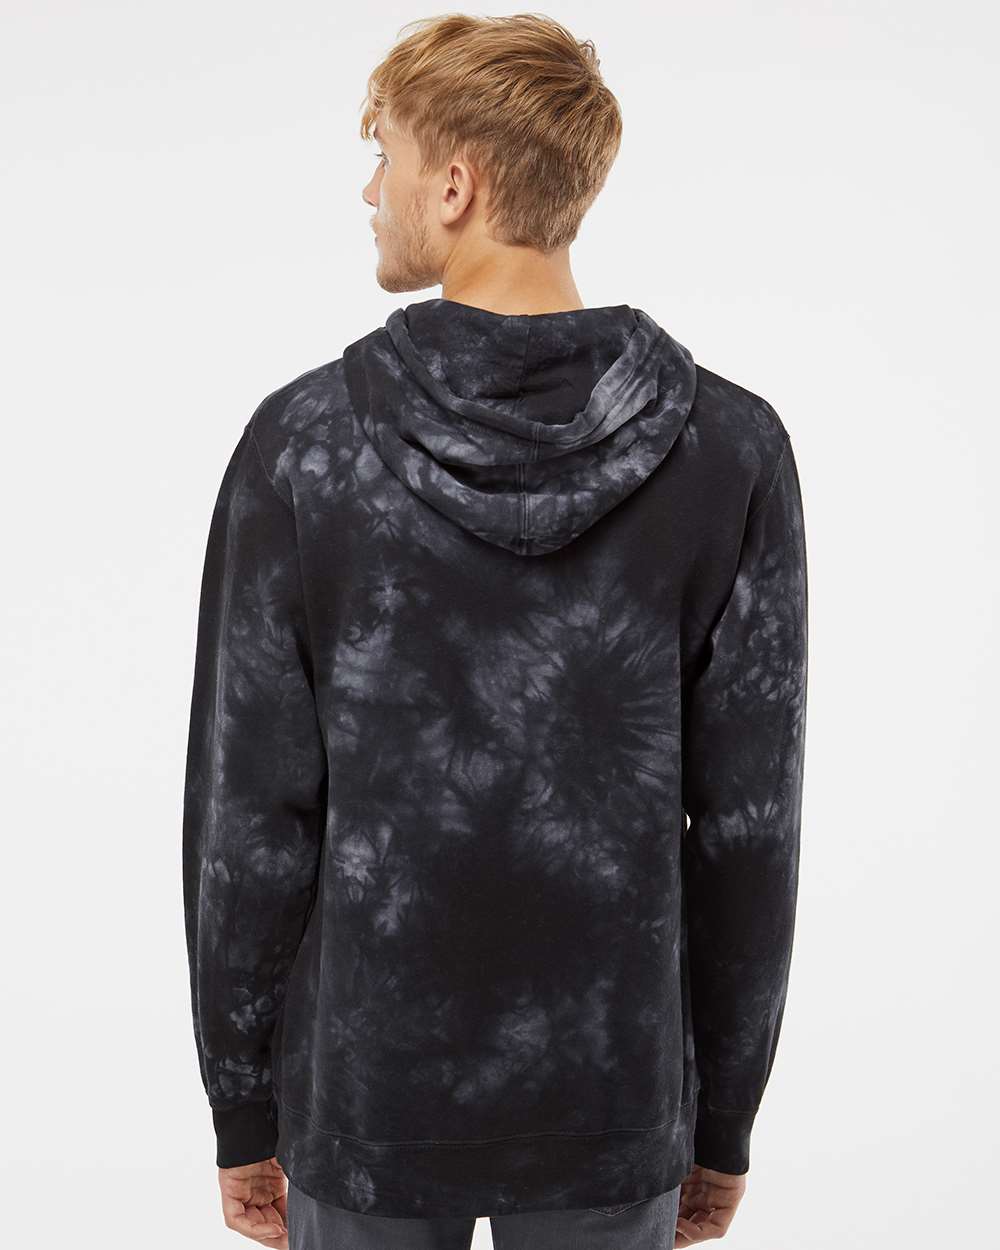 Independent Trading Co. Unisex Midweight Tie-Dyed Hooded Sweatshirt PRM4500TD #colormdl_Tie Dye Black